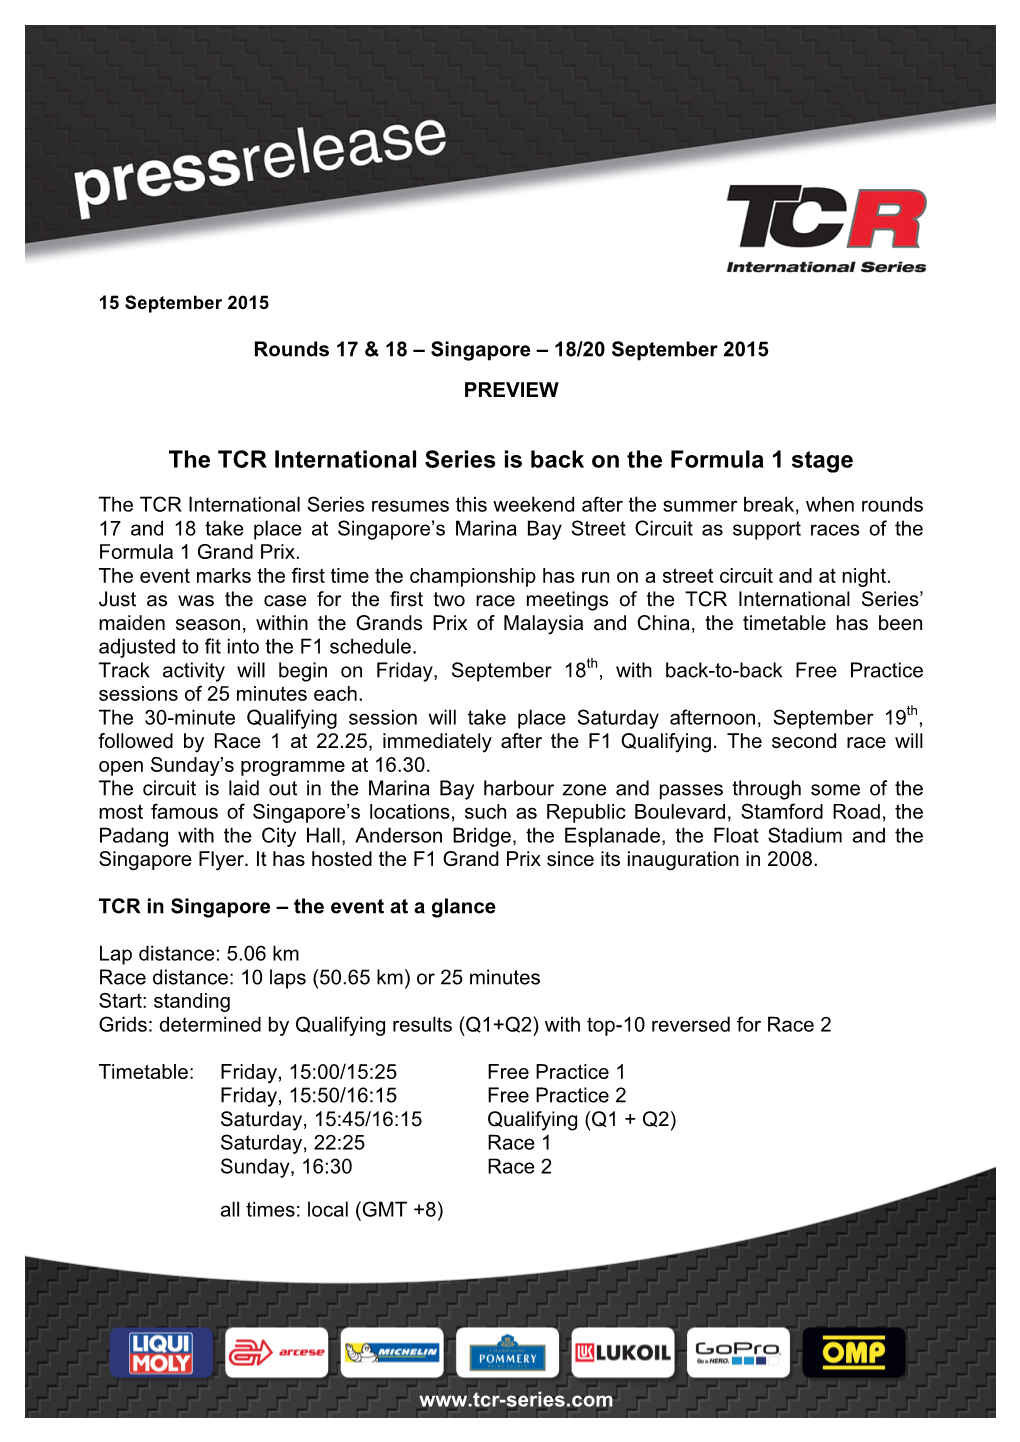 The TCR International Series Is Back on the Formula 1 Stage